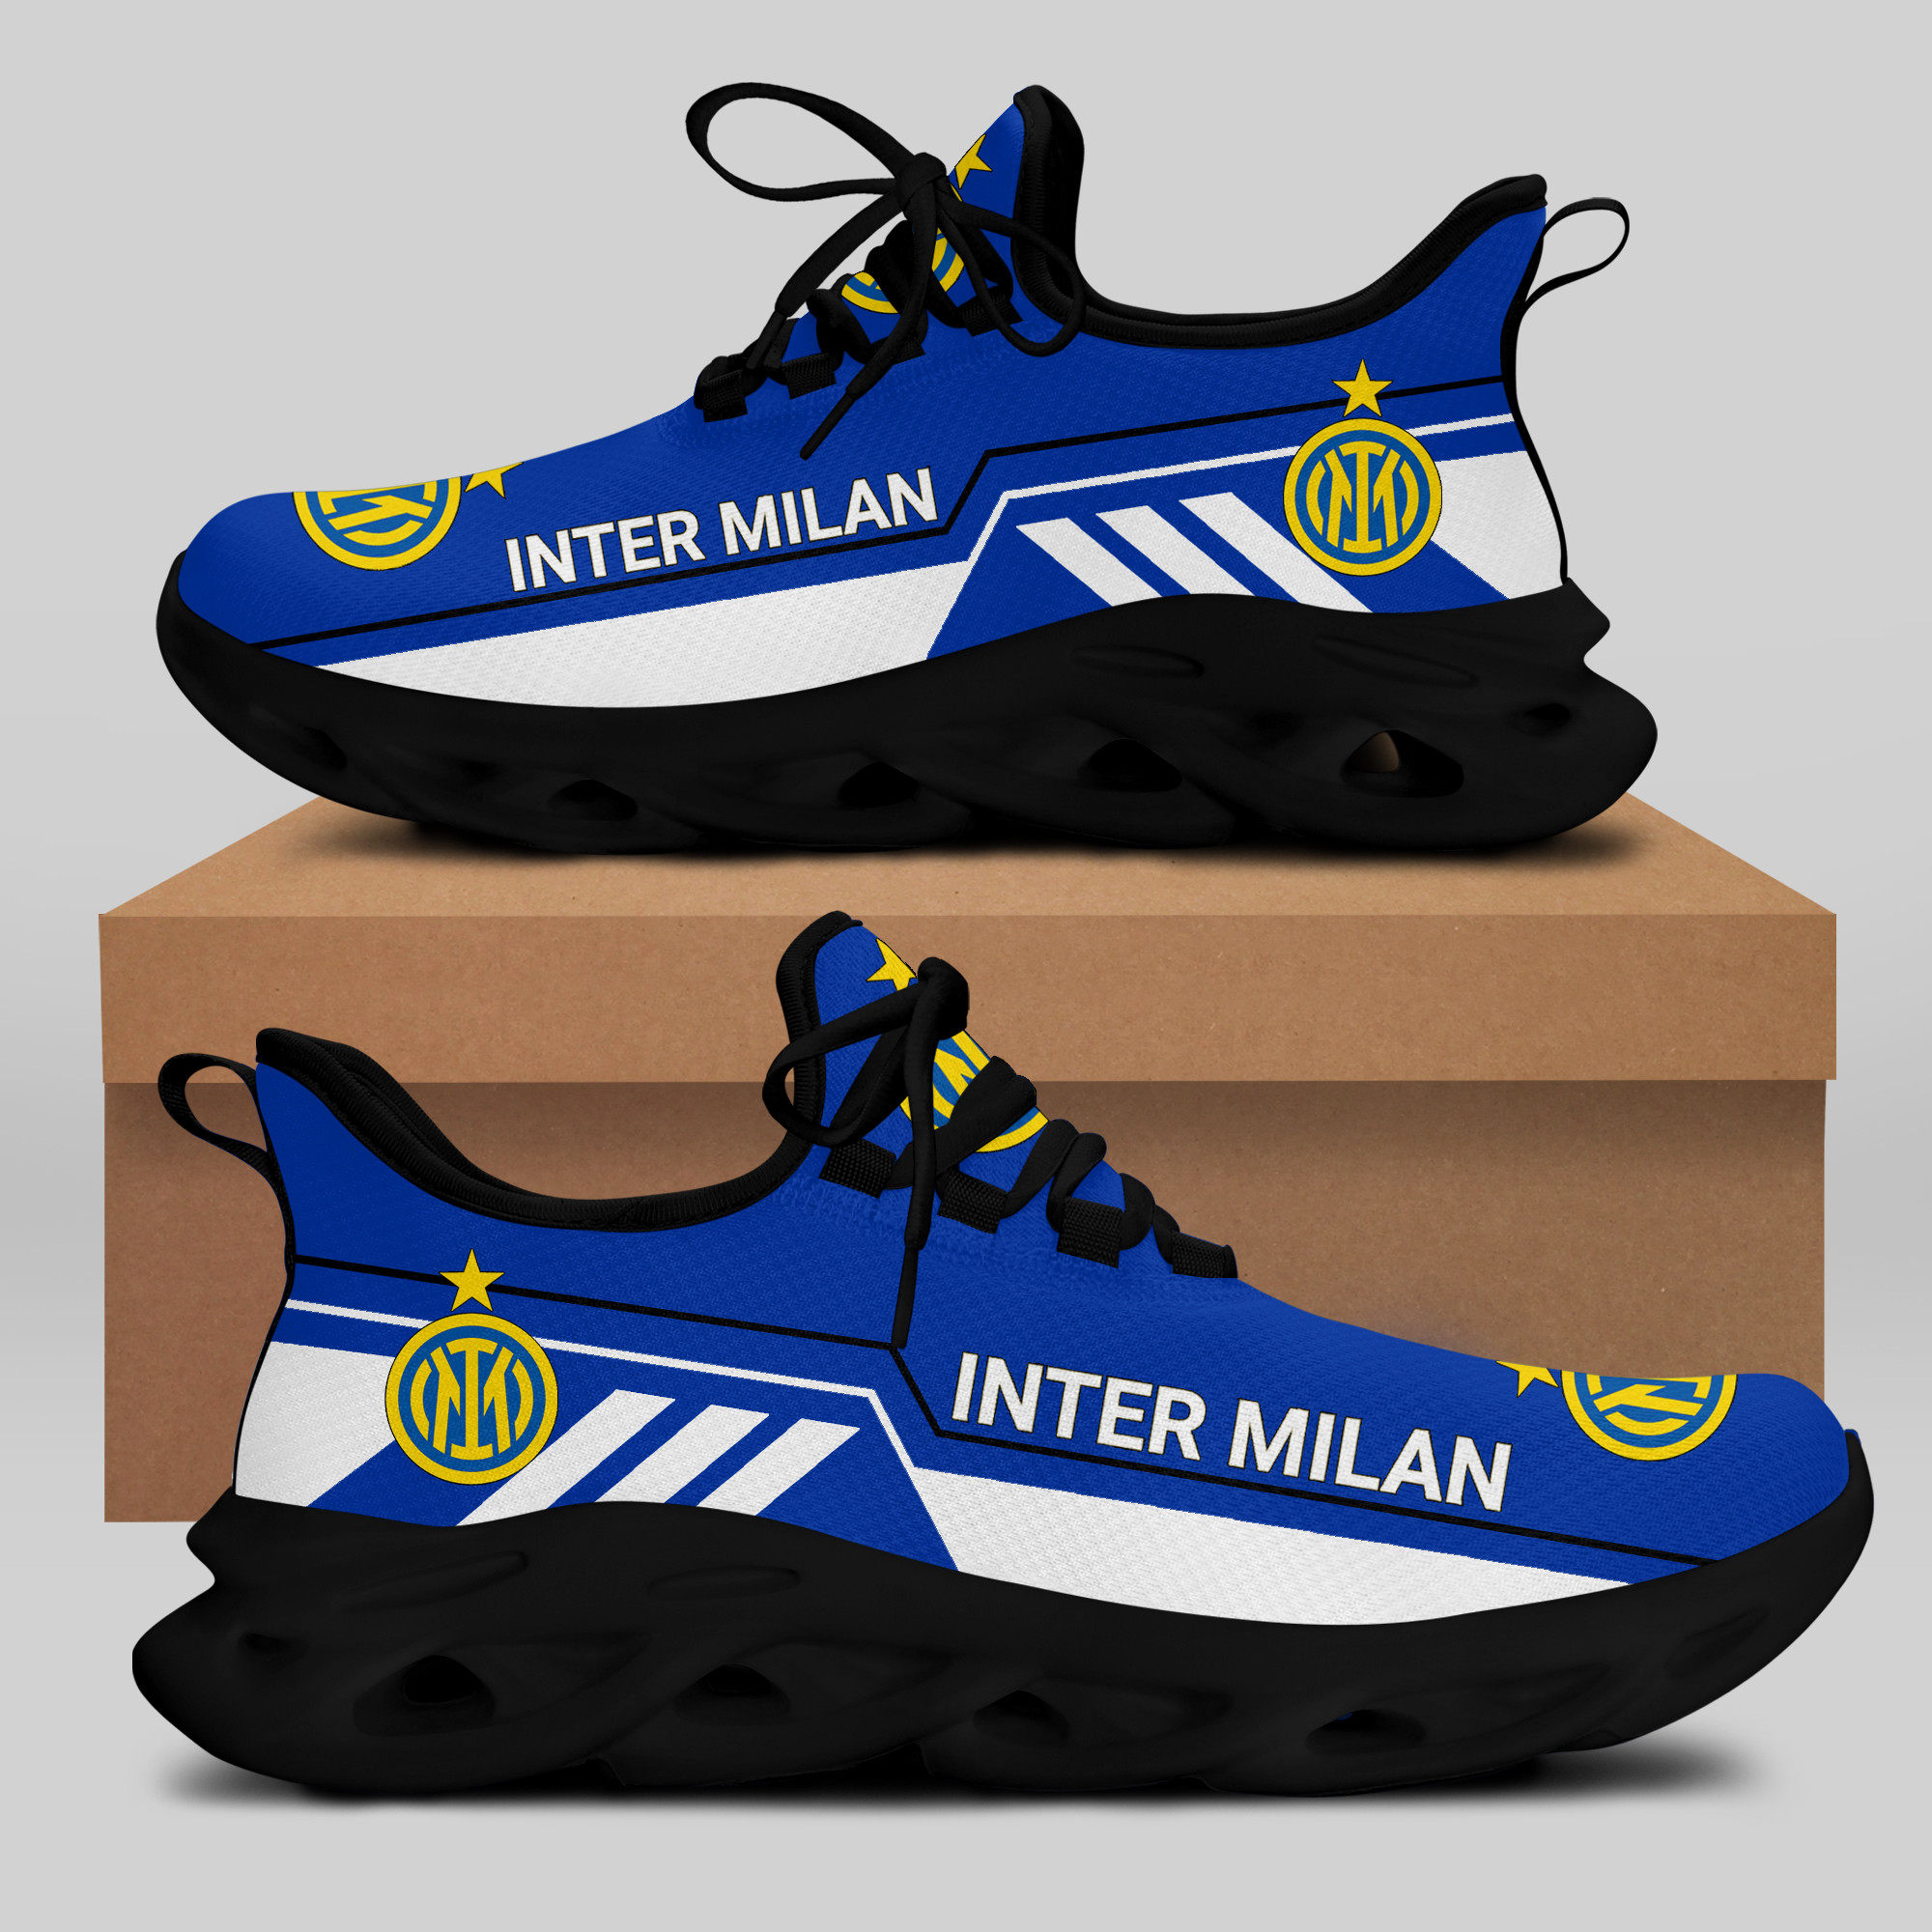 Inter Milan RUNNING SHOES VER 20 - Amzgiftboutique - Best gifts for you